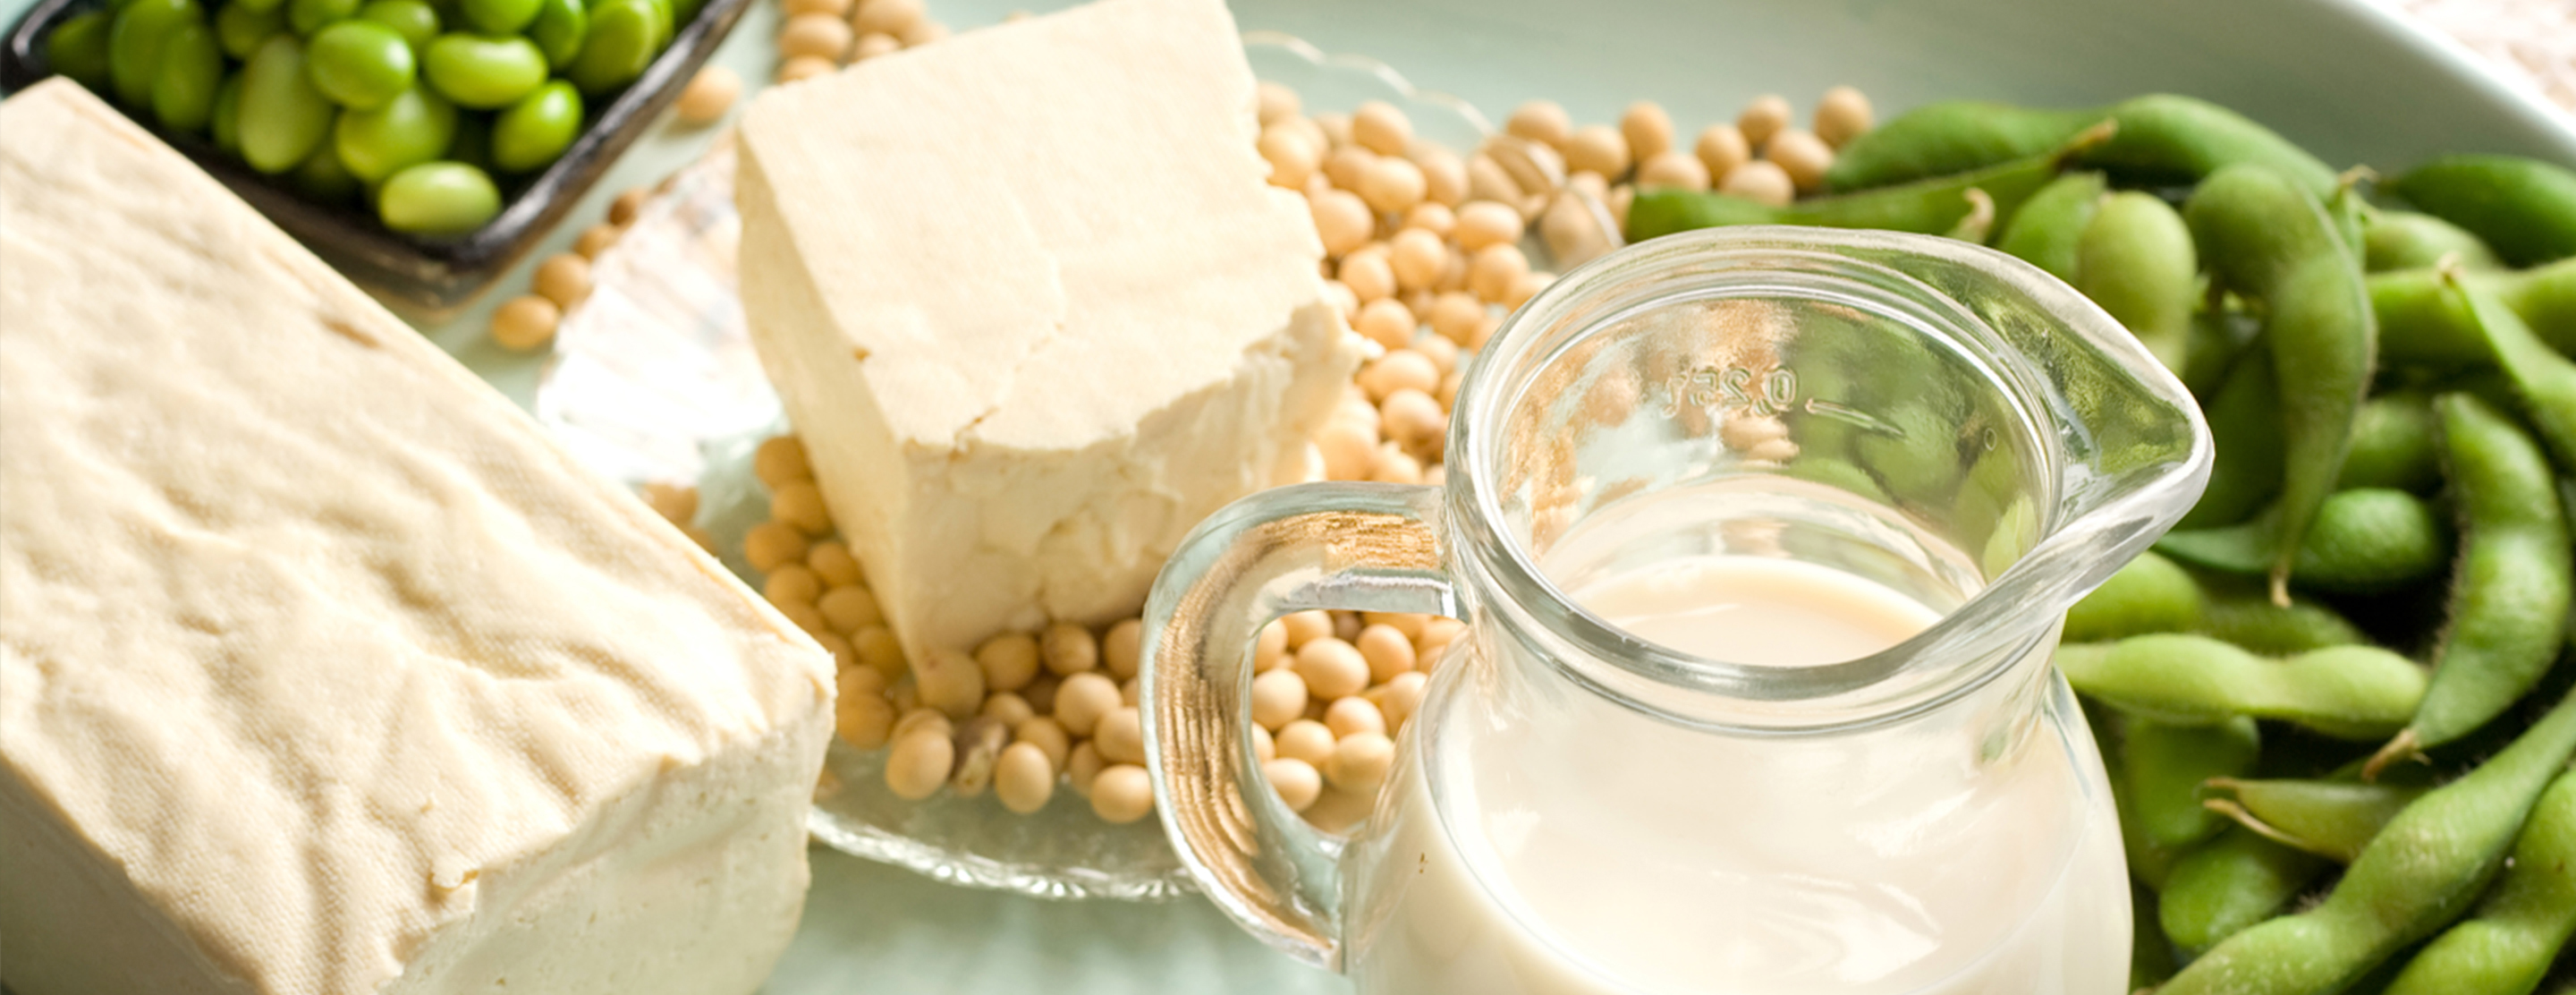 Is Soy Healthy or Harmful to Your Health? - Scripps Health